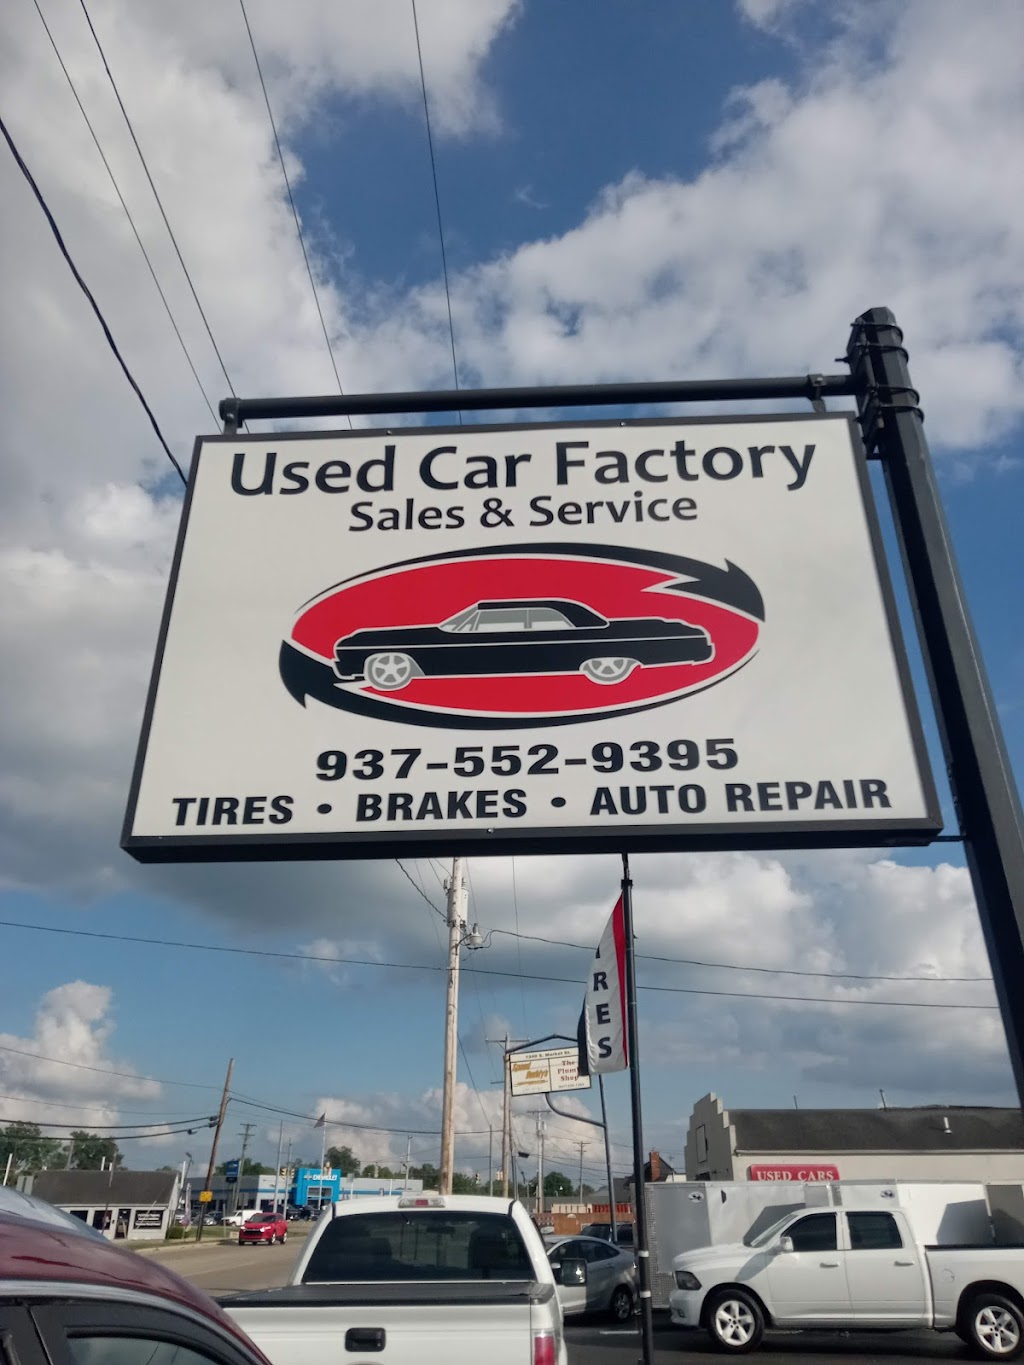 Used Car Factory Sales & Service Troy, Ohio | 1322 S Market St, Troy, OH 45373 | Phone: (937) 552-9395